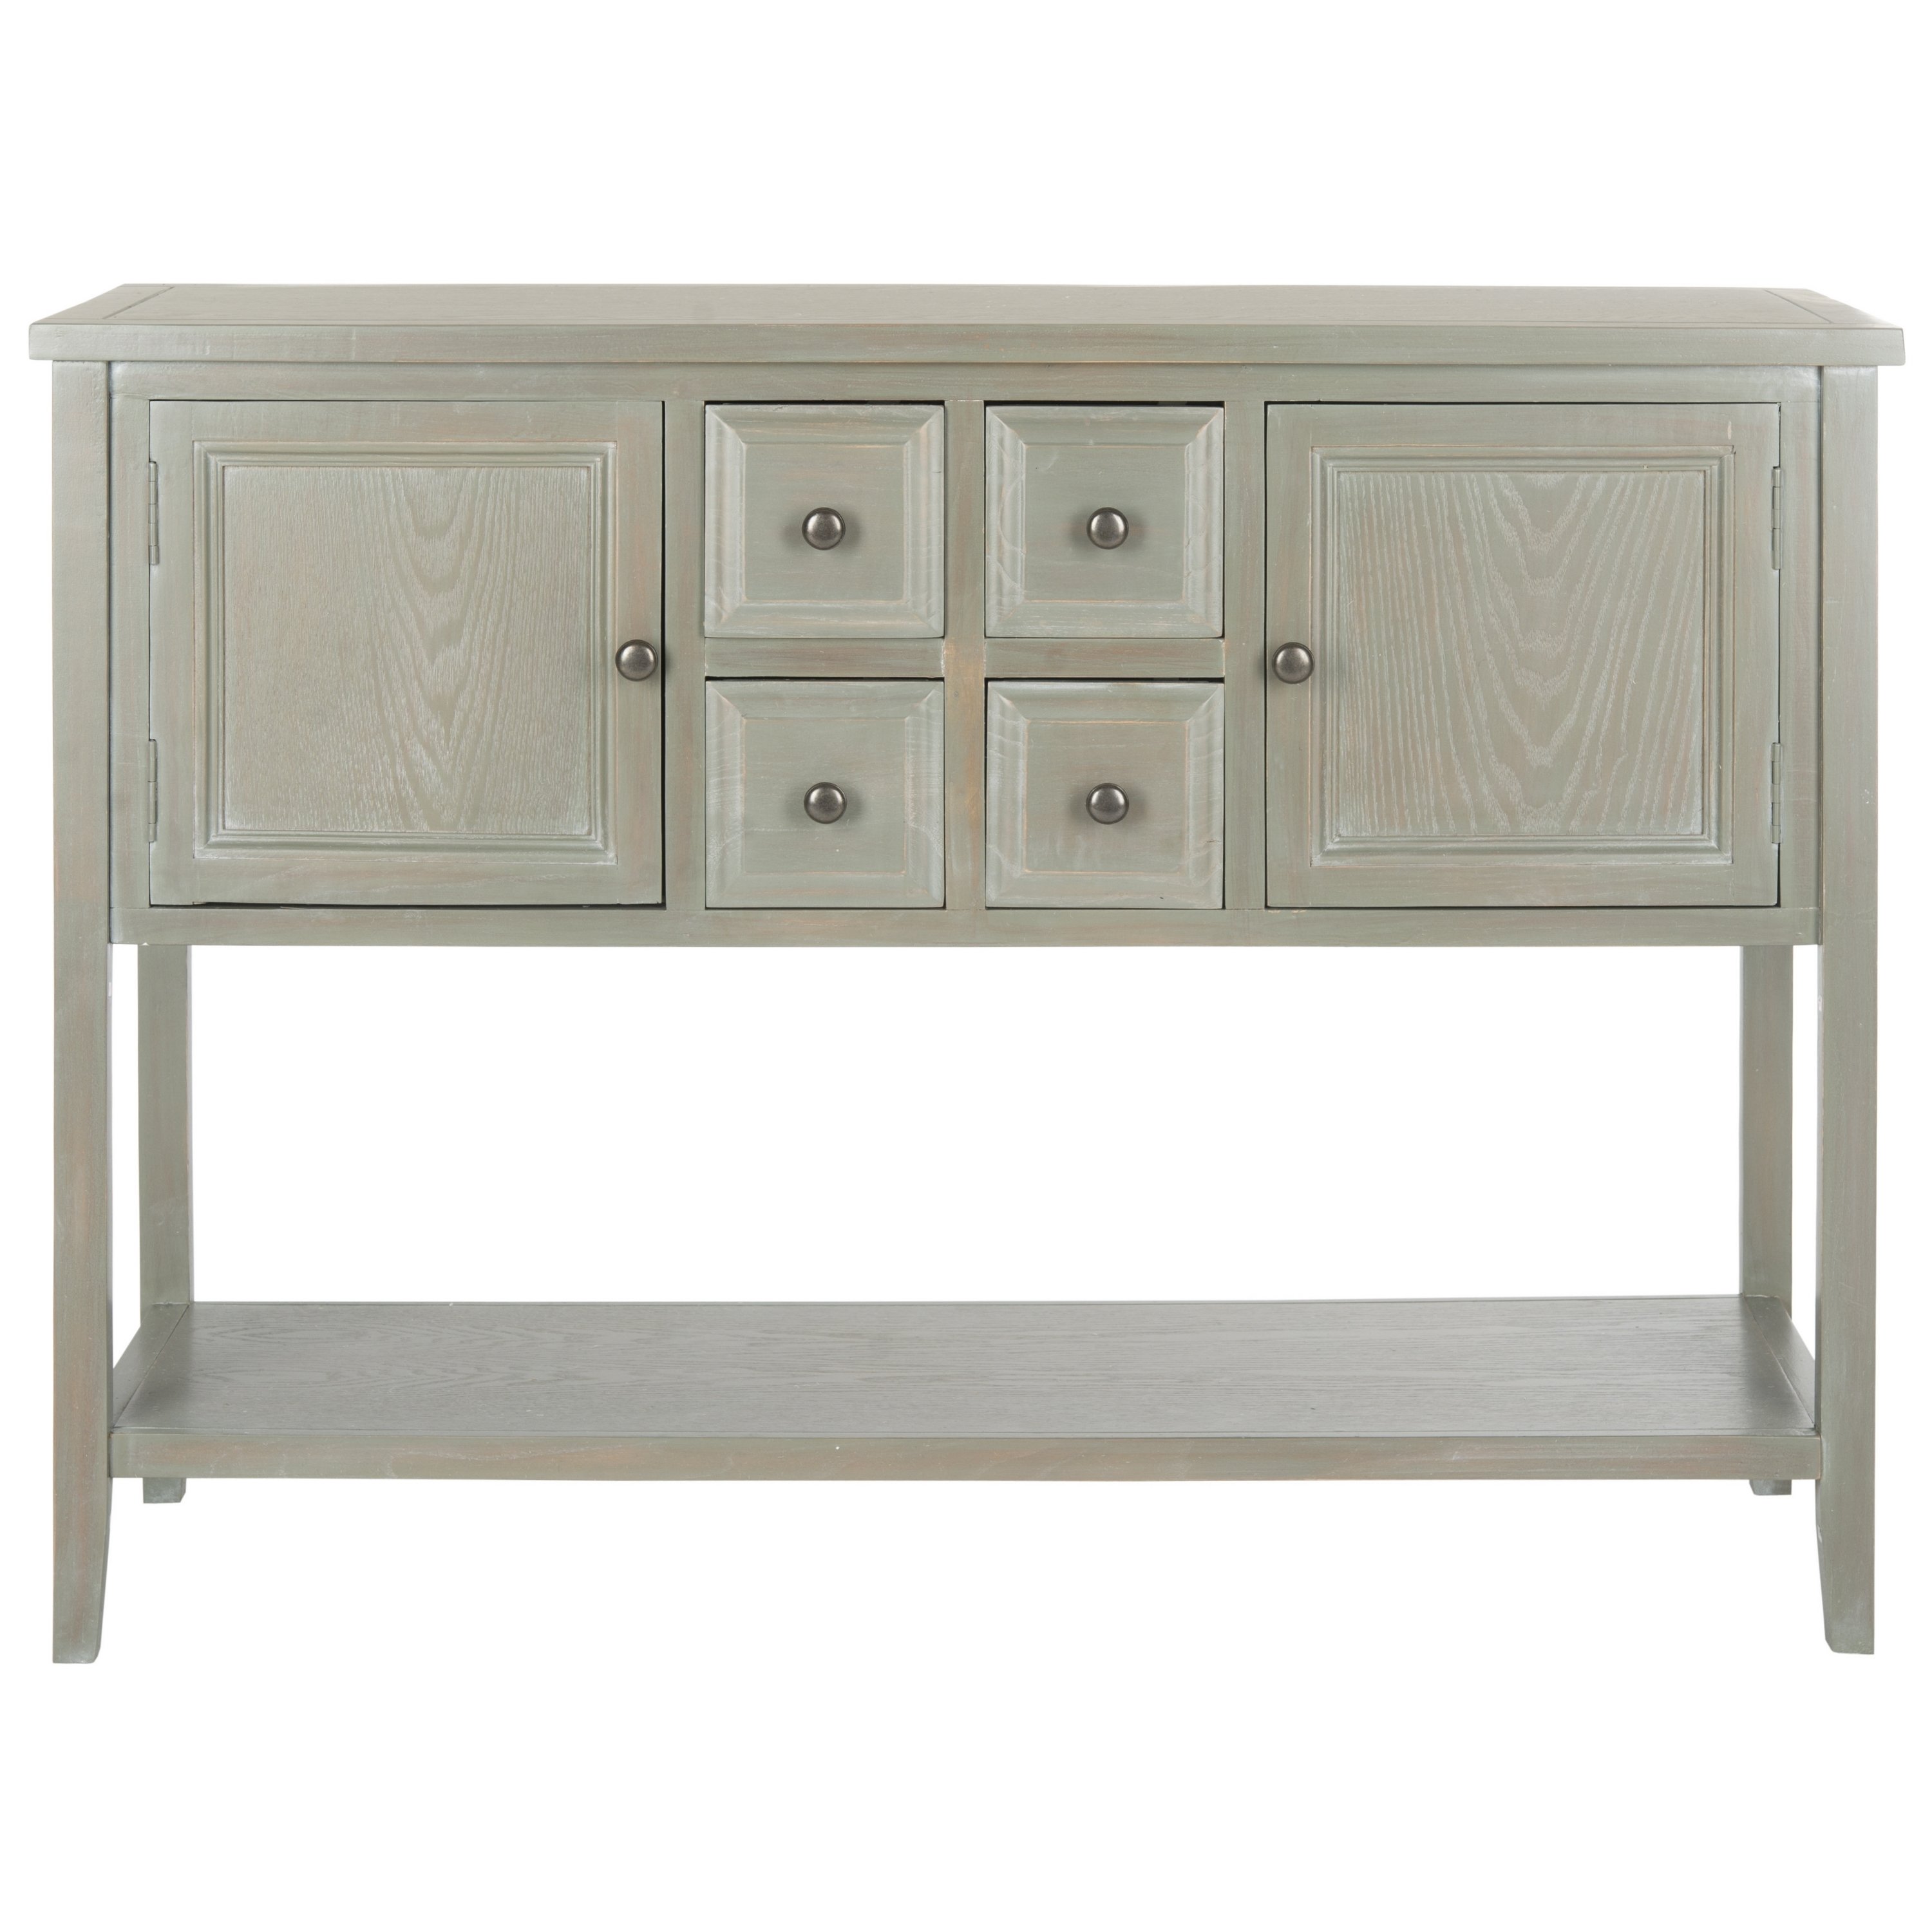 safavieh charlotte ash grey storage sideboard free janika accent table shipping today ashley furniture coffee set pottery barn wall desk jofran adjustable beds chair cover factory